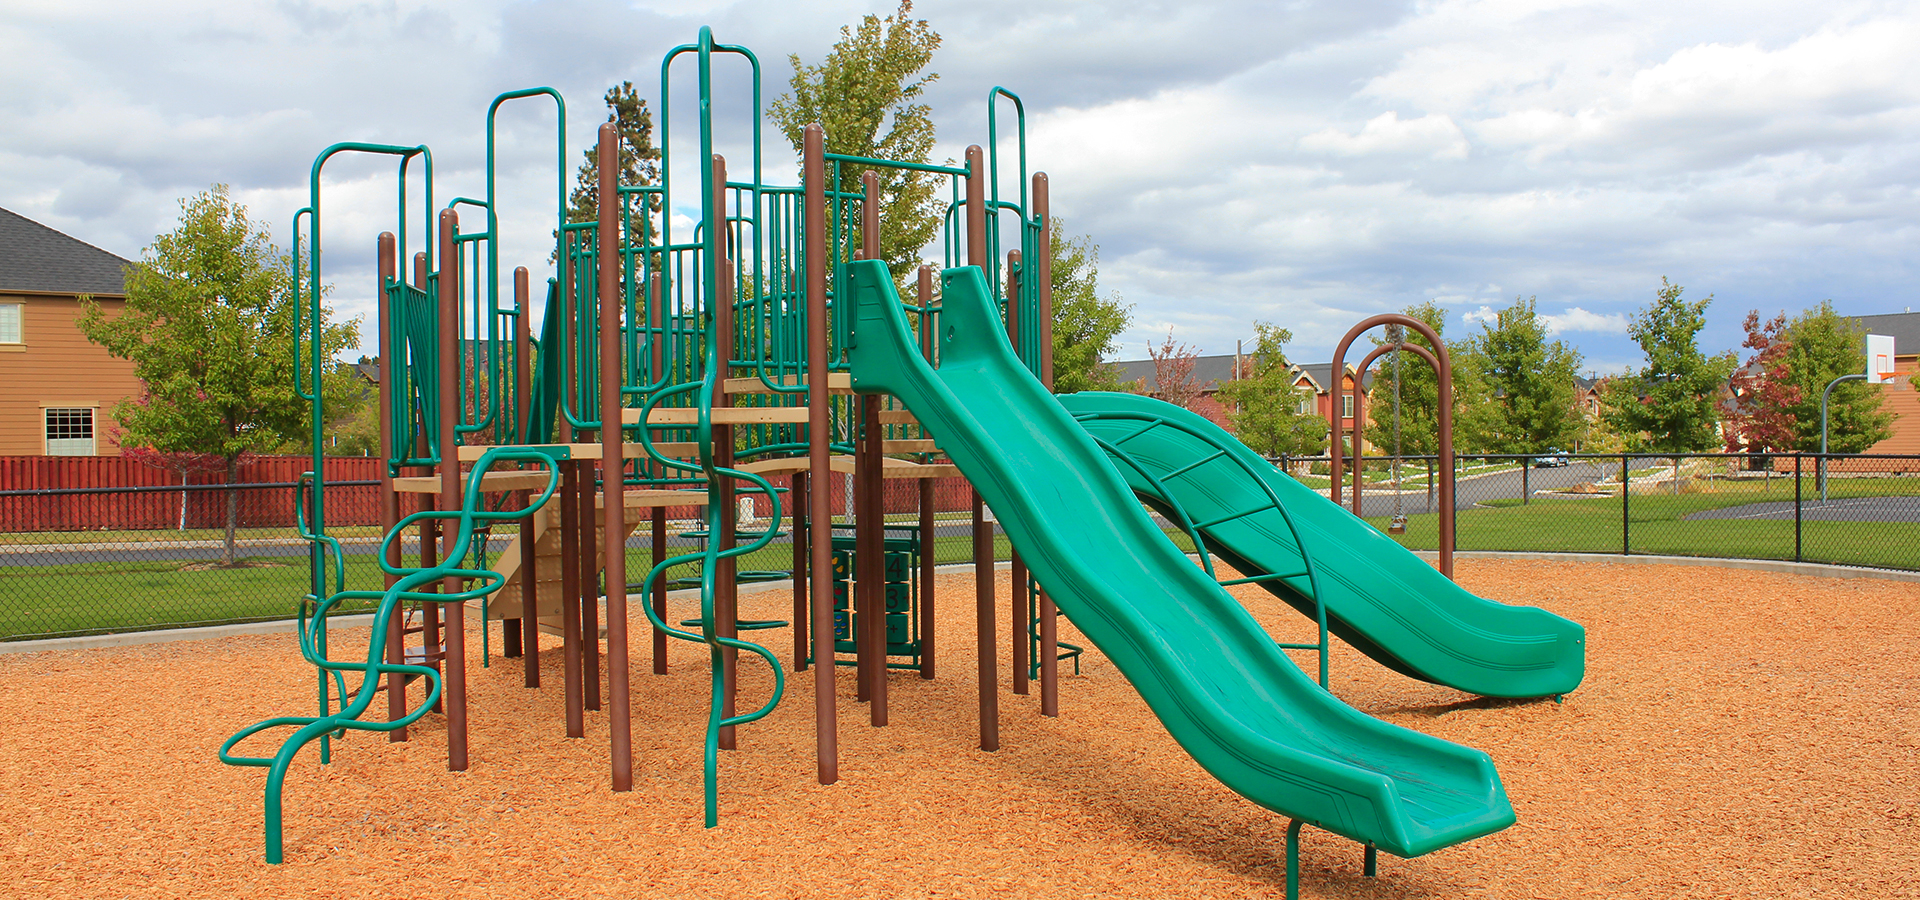 The playground at Sun Meadow Park.